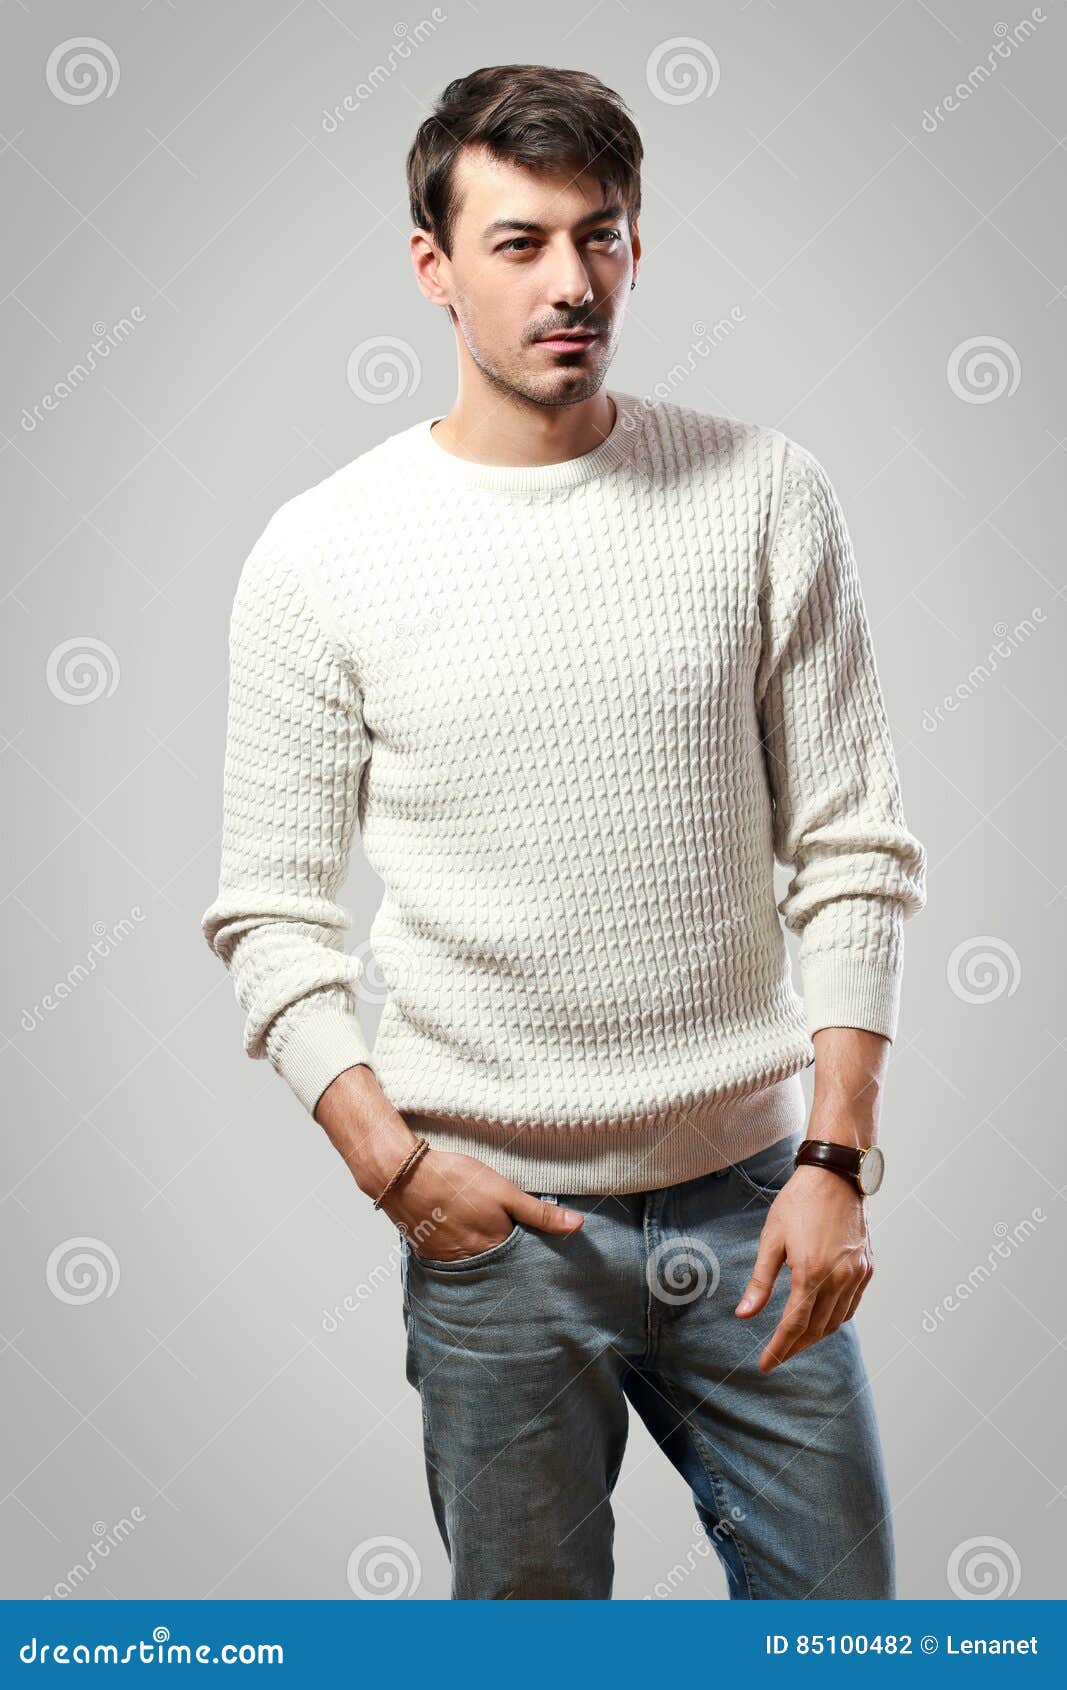 Handsome man stock photo. Image of casual, handsome, ethnicity - 85100482